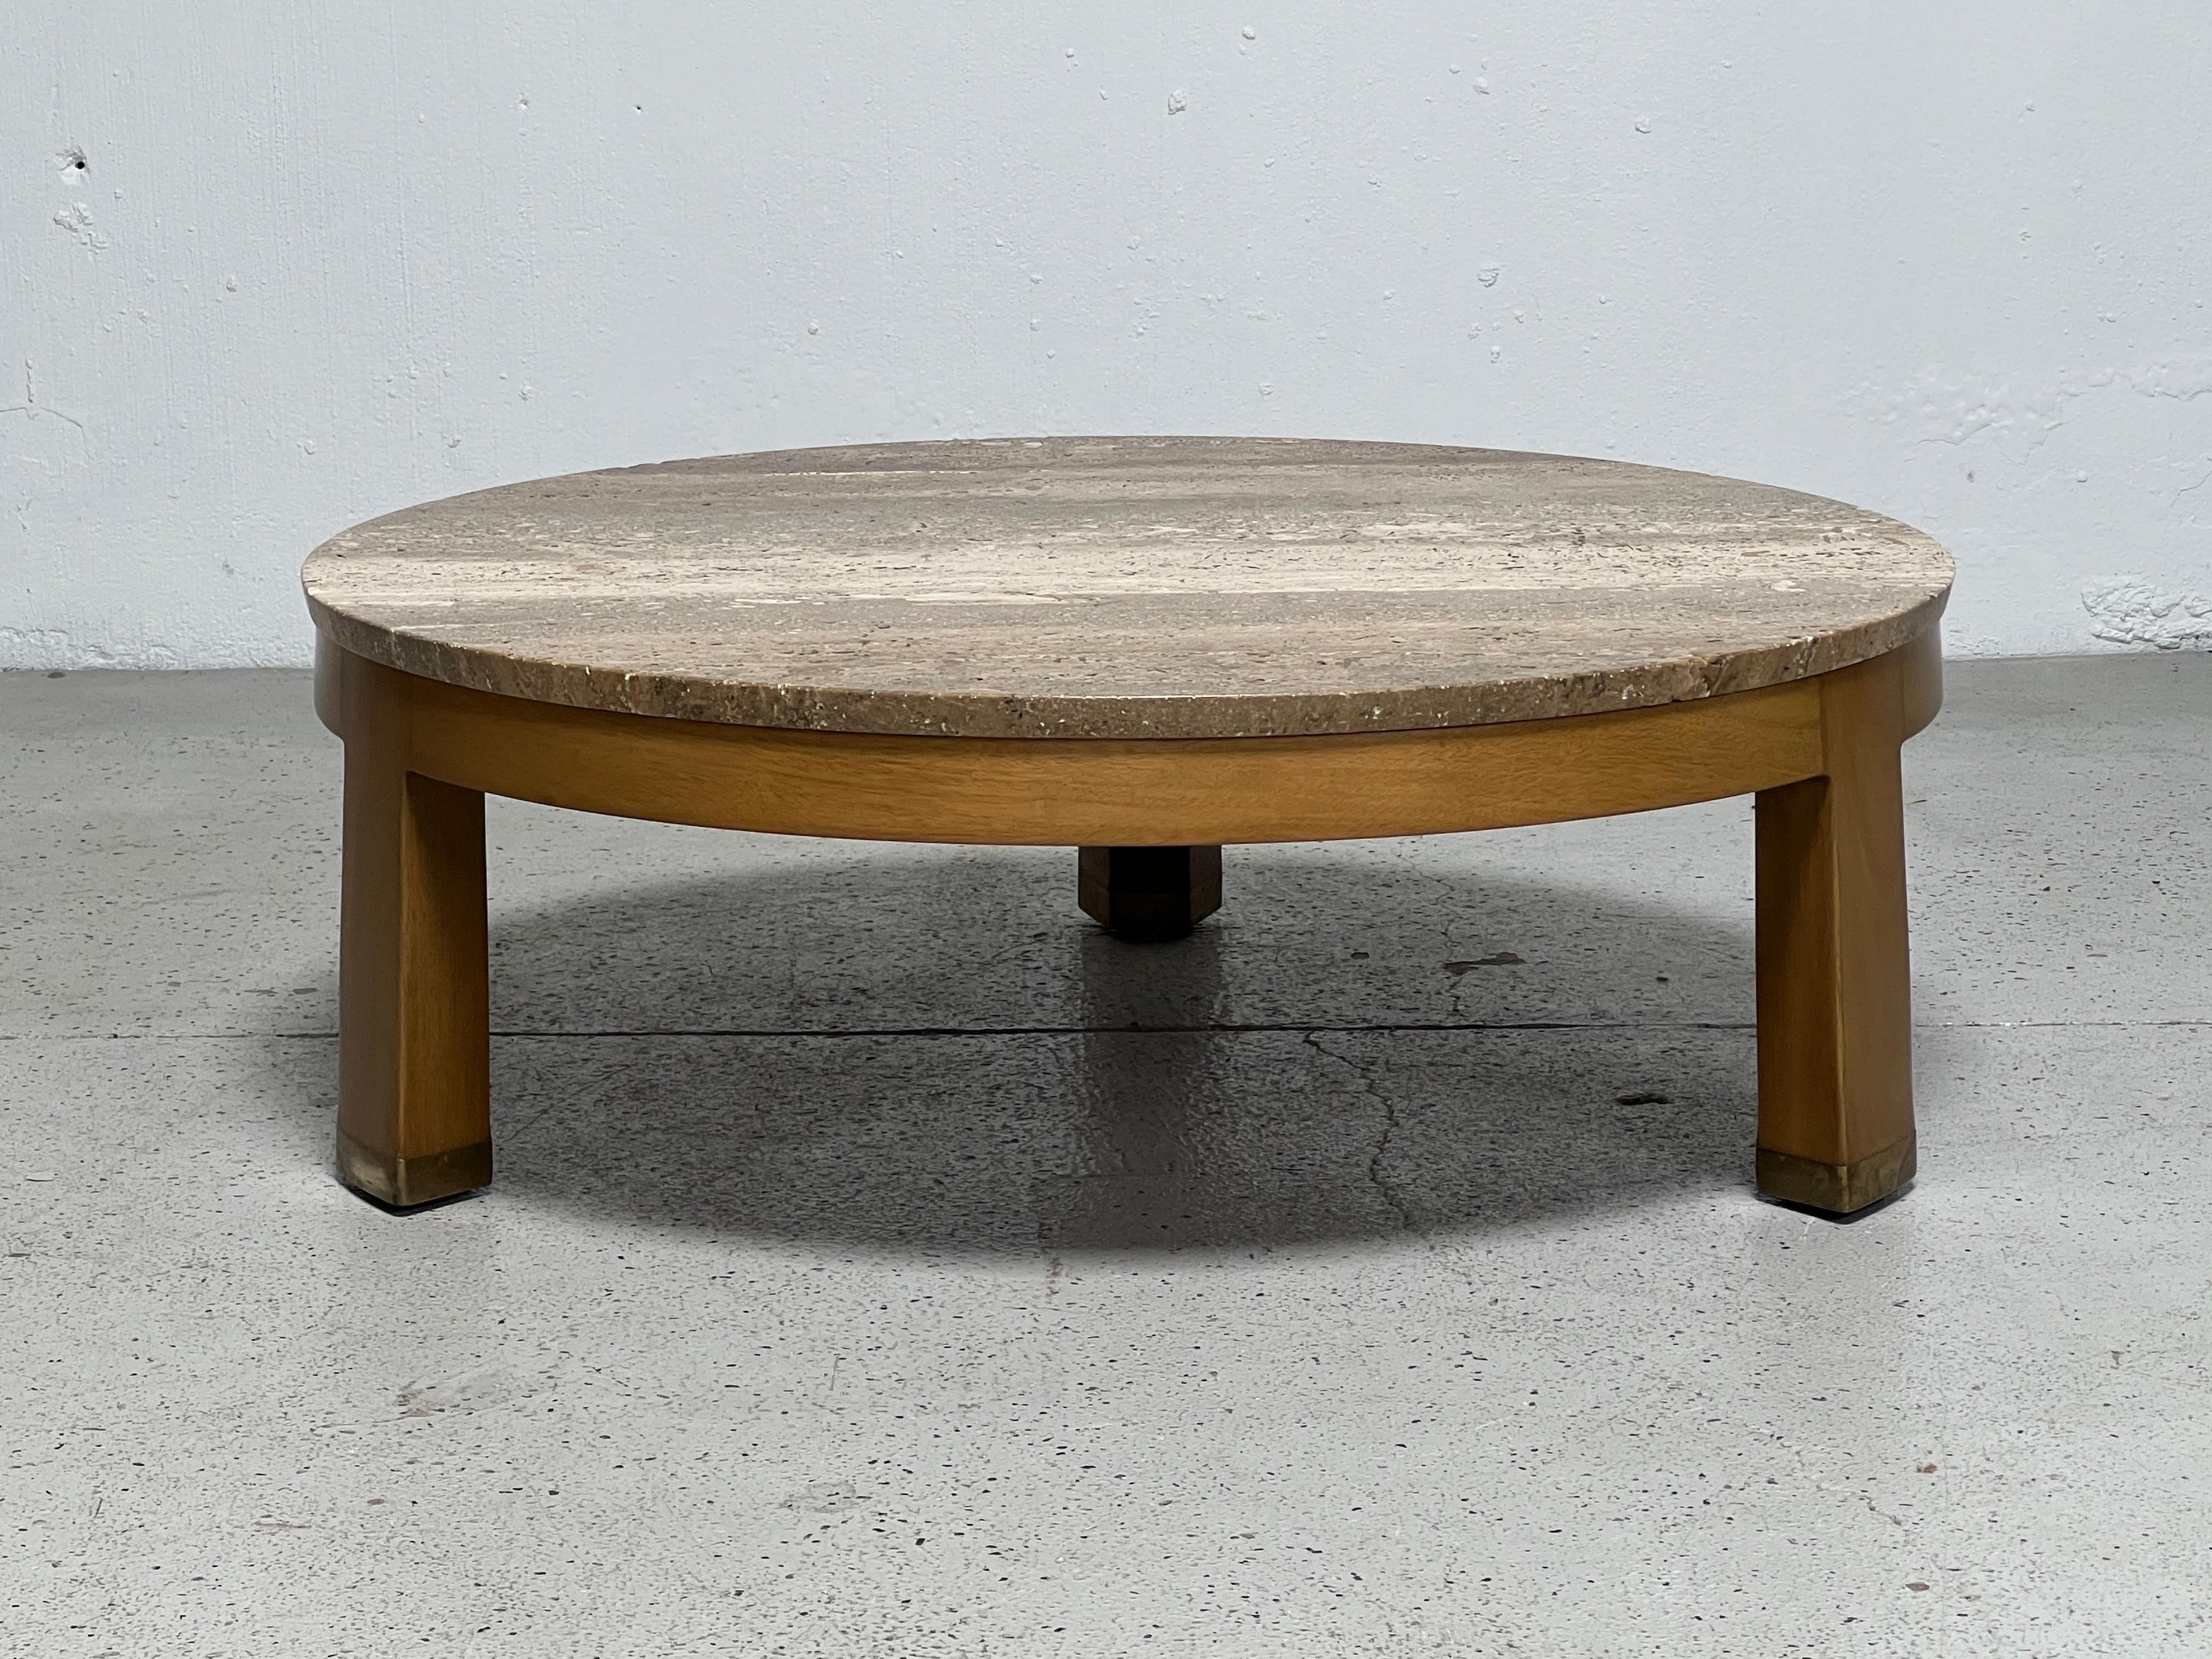 A low coffee table with three legged mahogany base, brass feet and travertine top. Designed by Edward Wormley for Dunbar. 